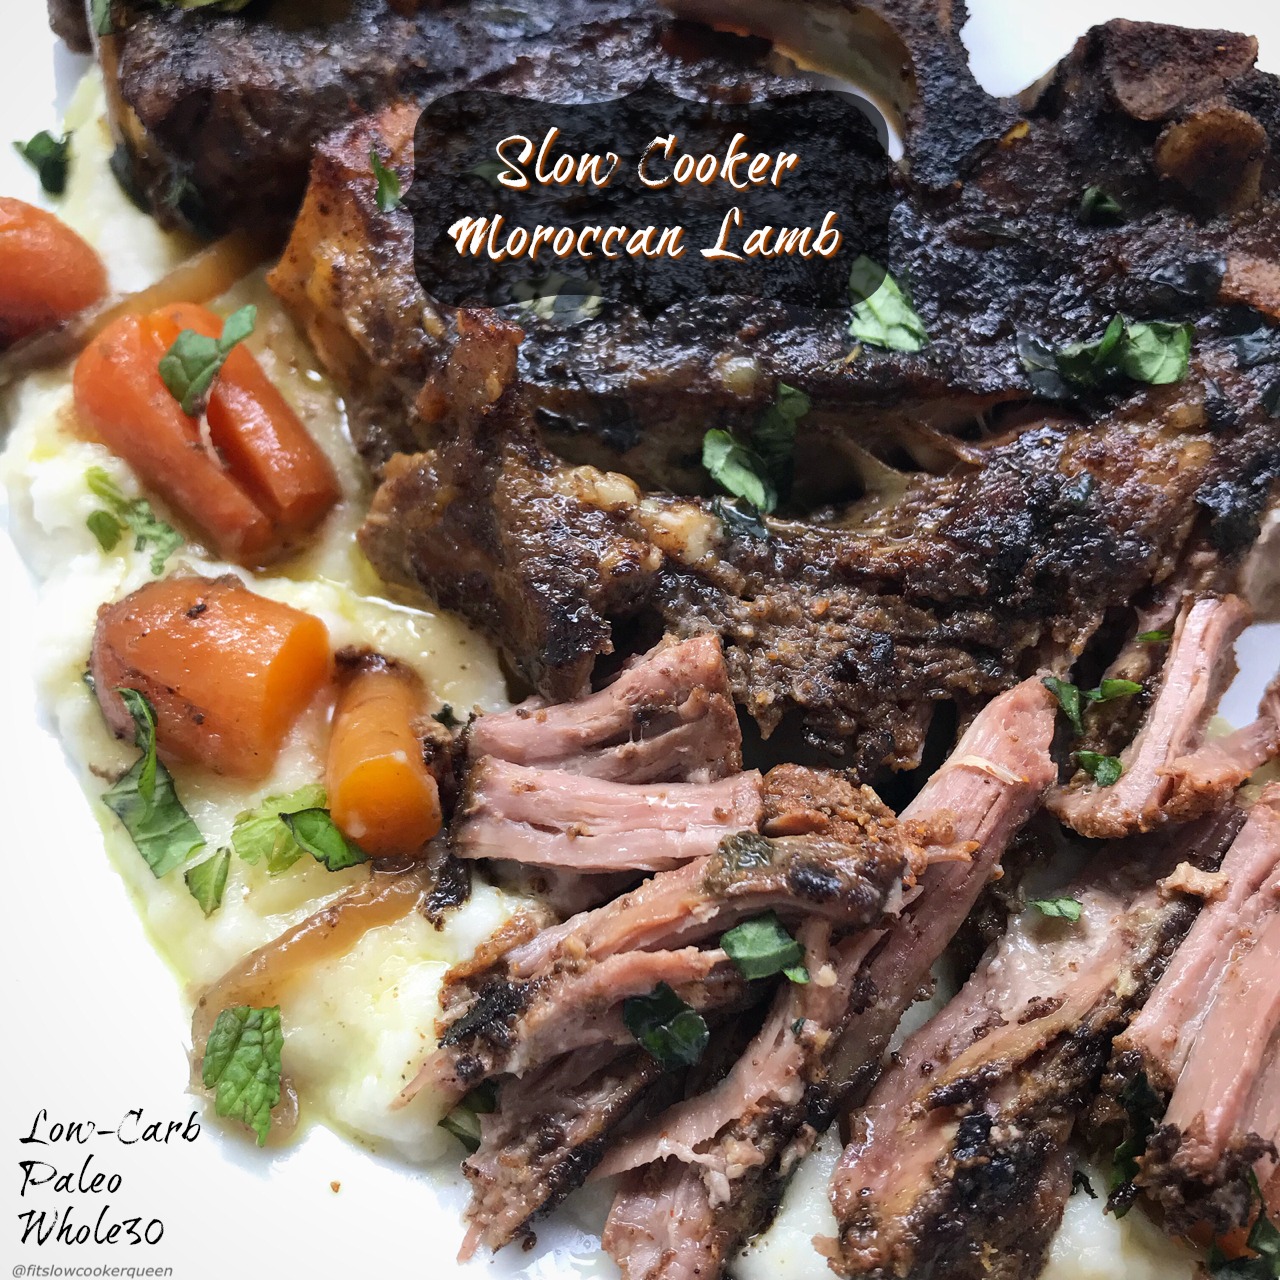 Lamb, spices, and a few vegetables are all you need for this simple and healthy slow cooker recipe. Together these ingredients will bring the flavors of Morocco to your kitchen.